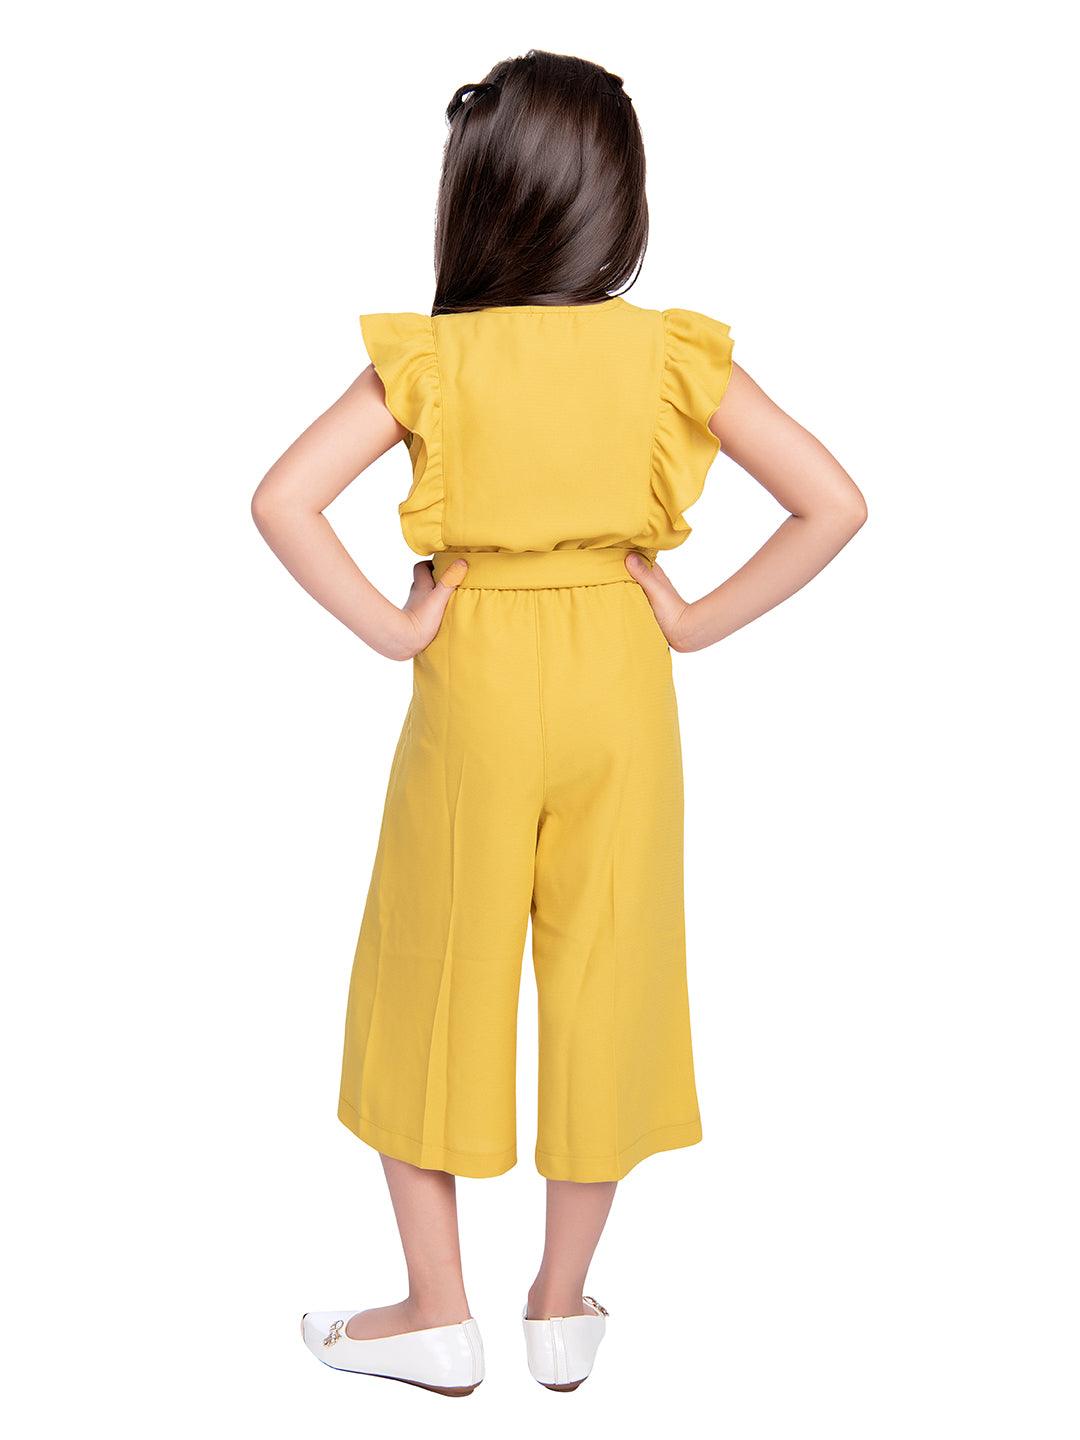 Tiny Baby Mustard Coloured Jumpsuit  - 2076 Mustard - TINY BABY INDIA shop.tinybaby.in